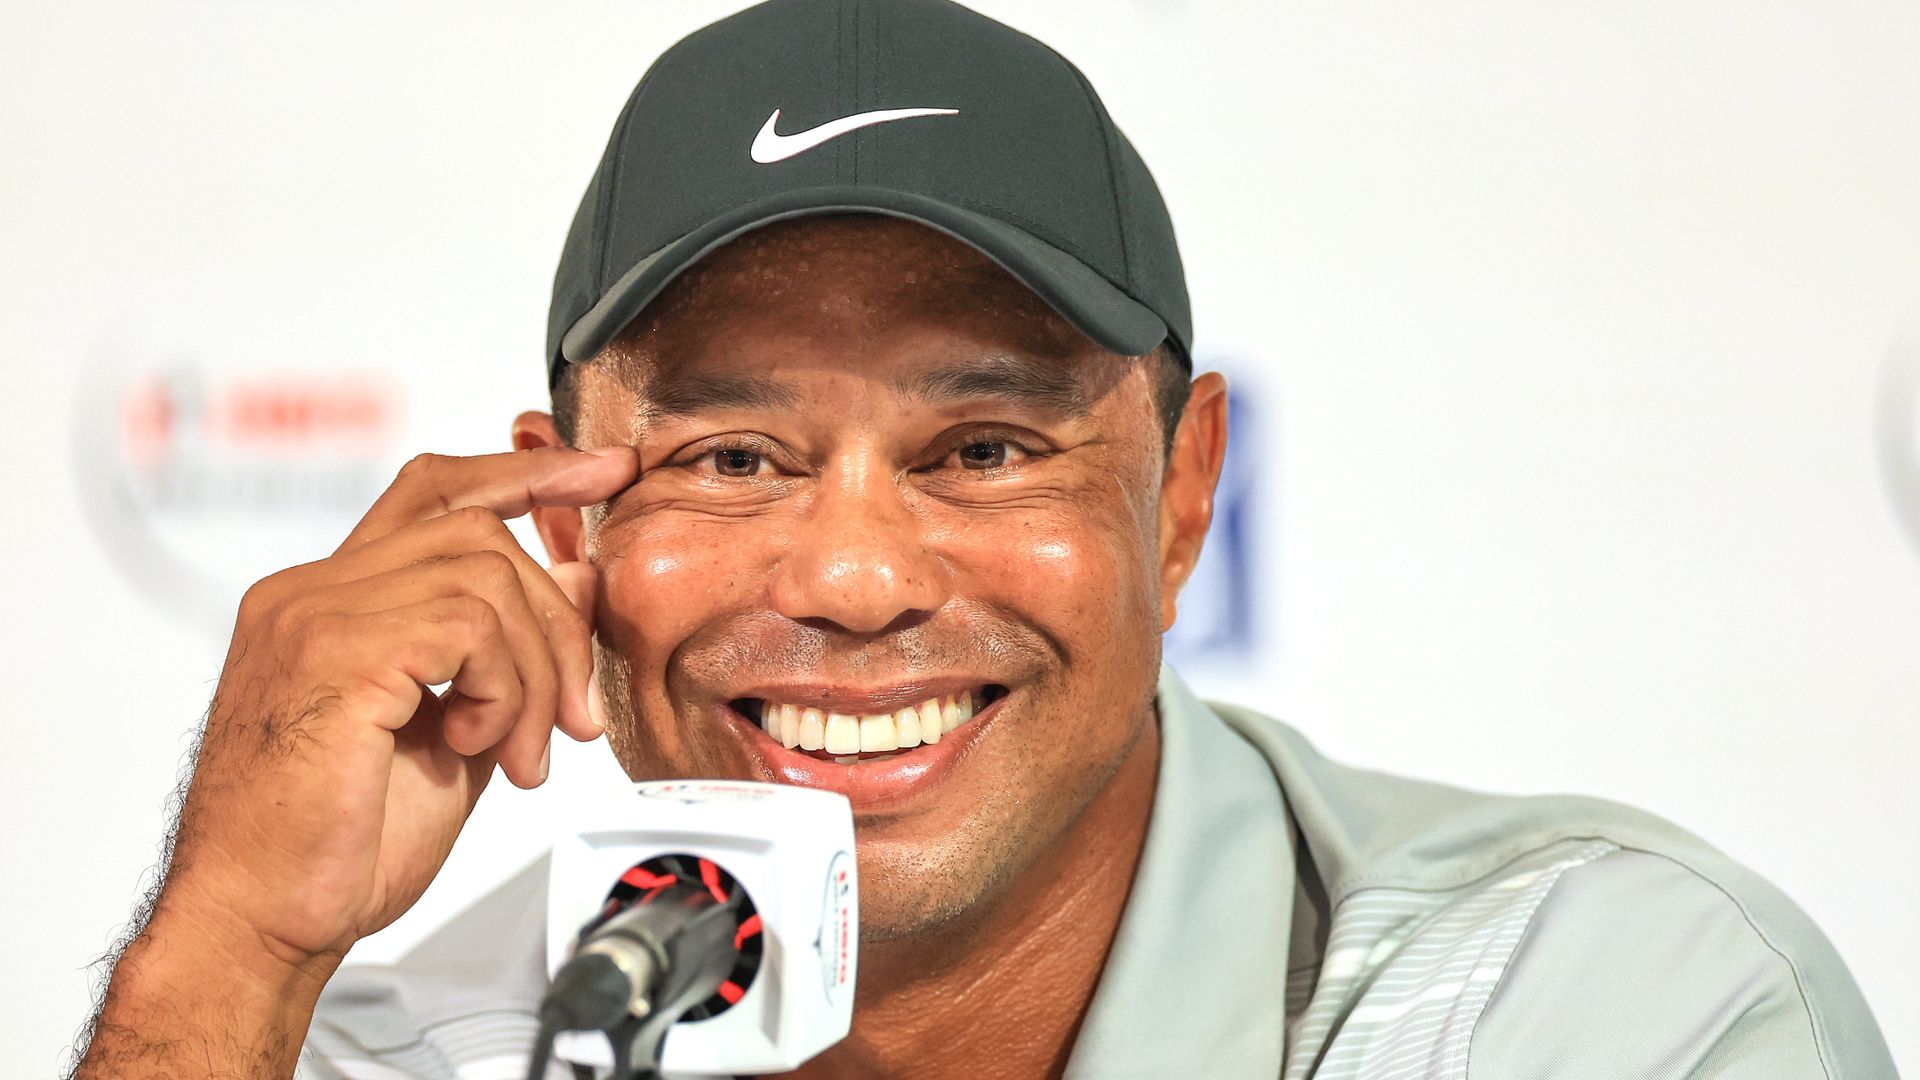 Woods 'absolutely' can still win but feeling 'rusty' ahead of comeback